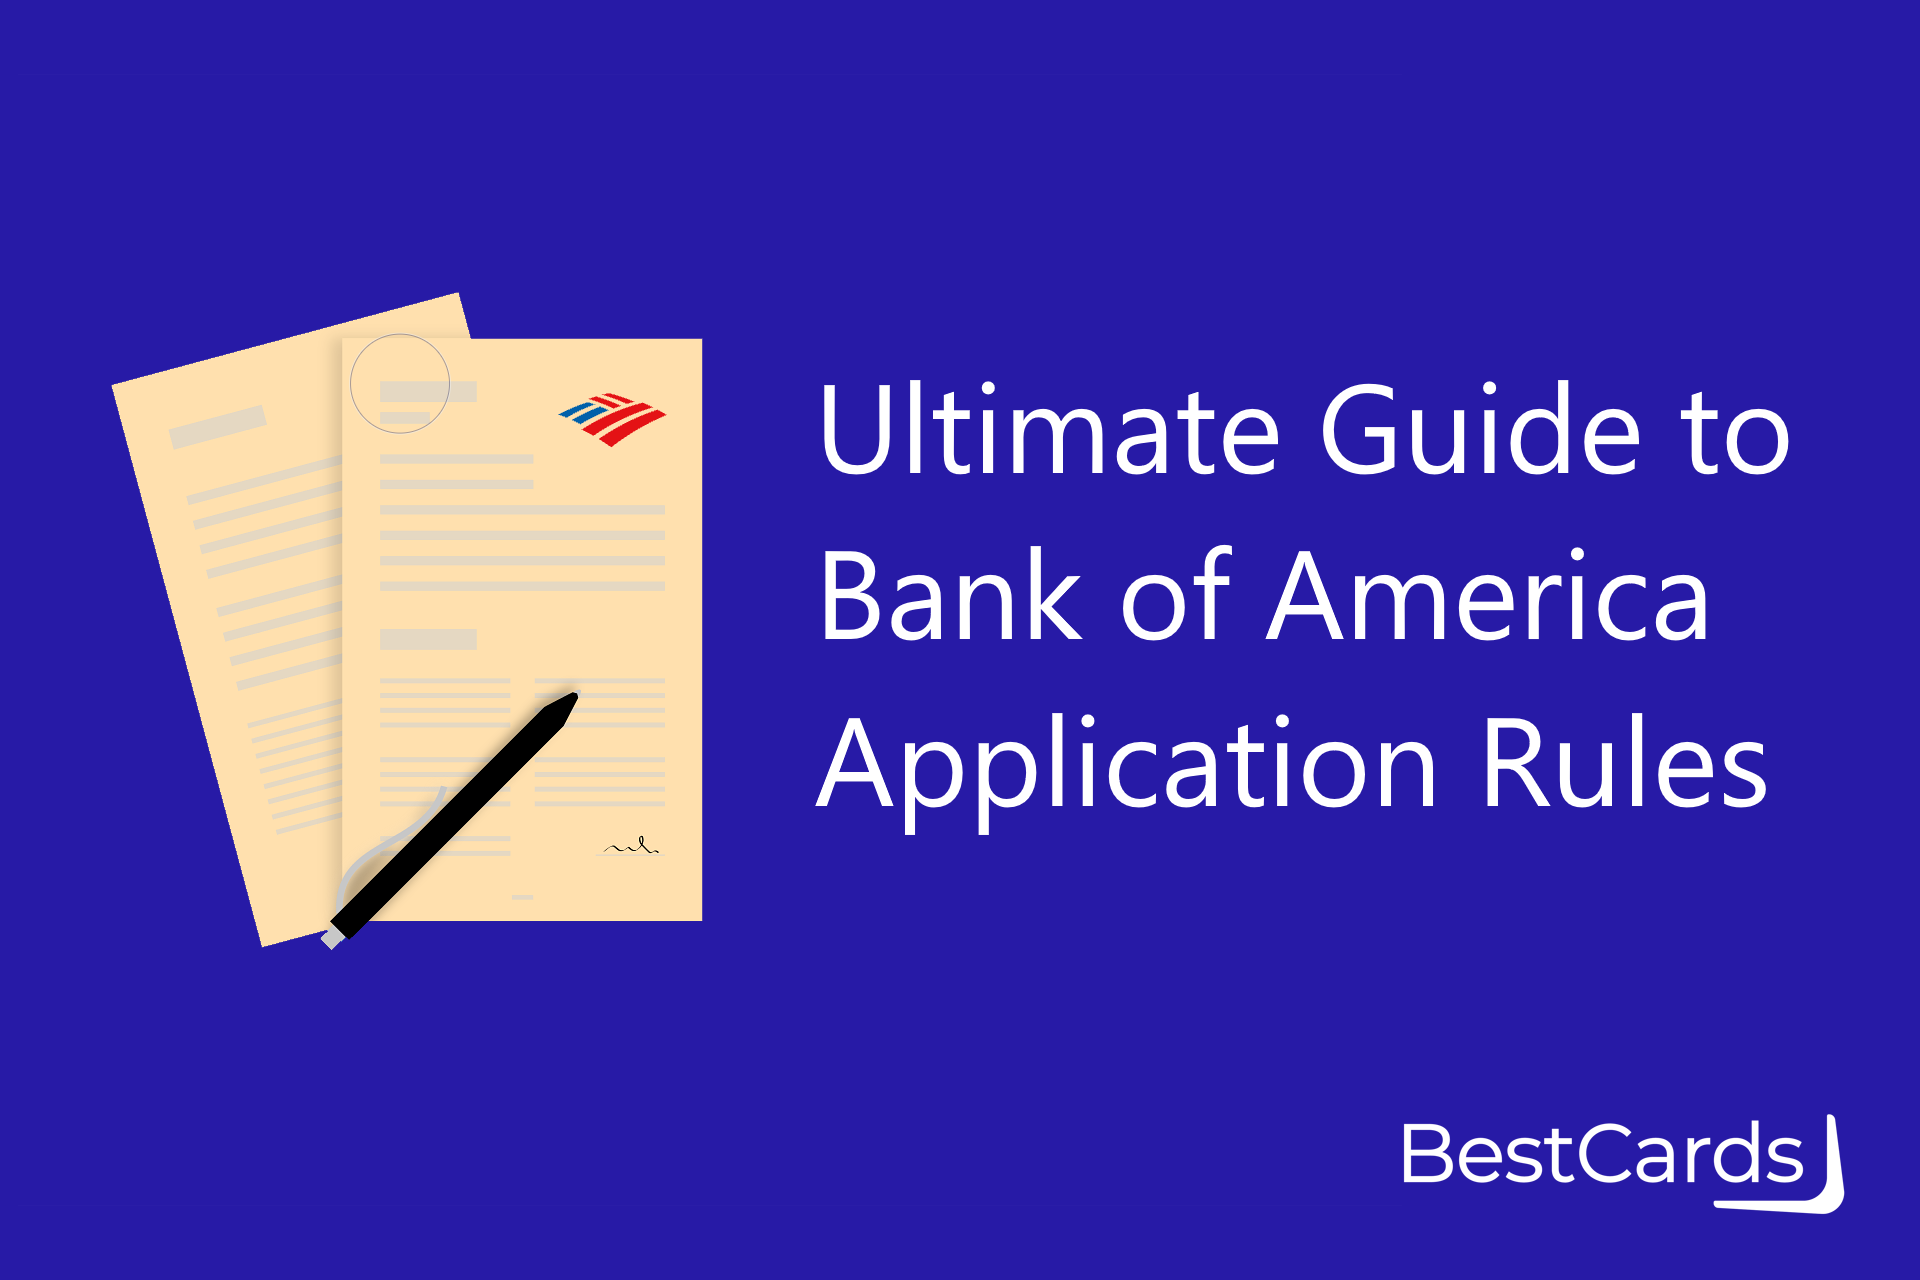 Ultimate Guide to Bank of America BOA Application Rules